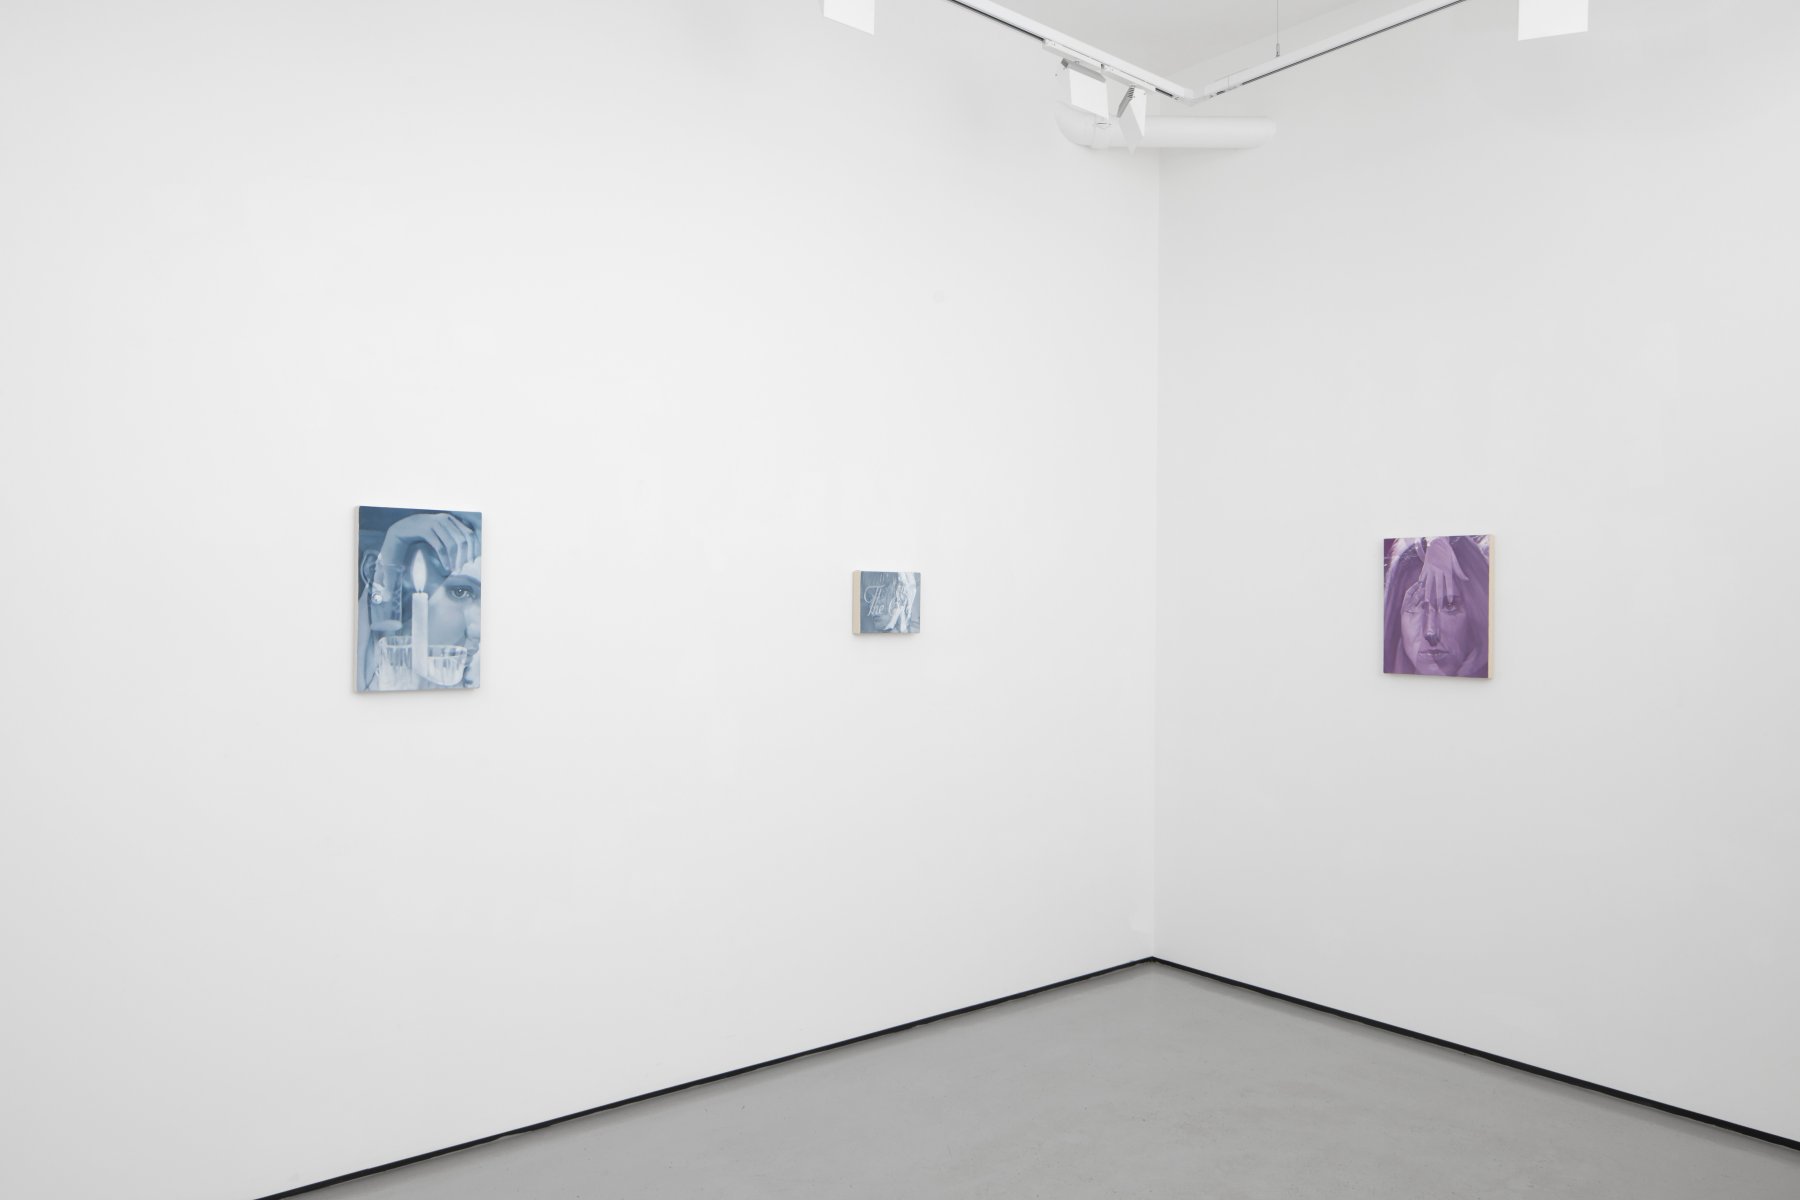 Installation image for Julia Maiuri: Yesterday & The End, at Workplace